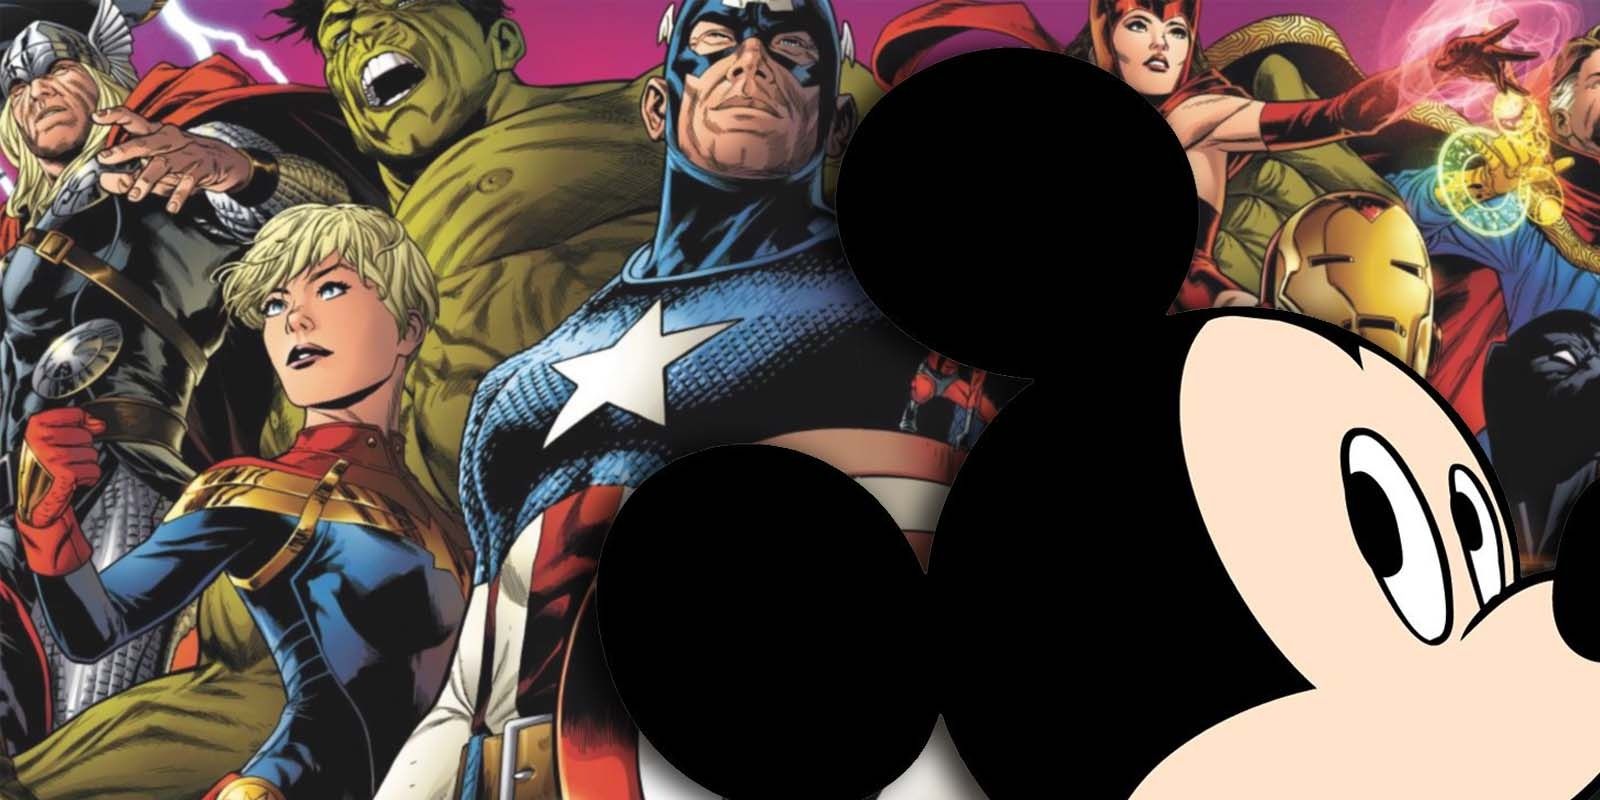 Mickey Mouse head looks back at Avengers comic book art